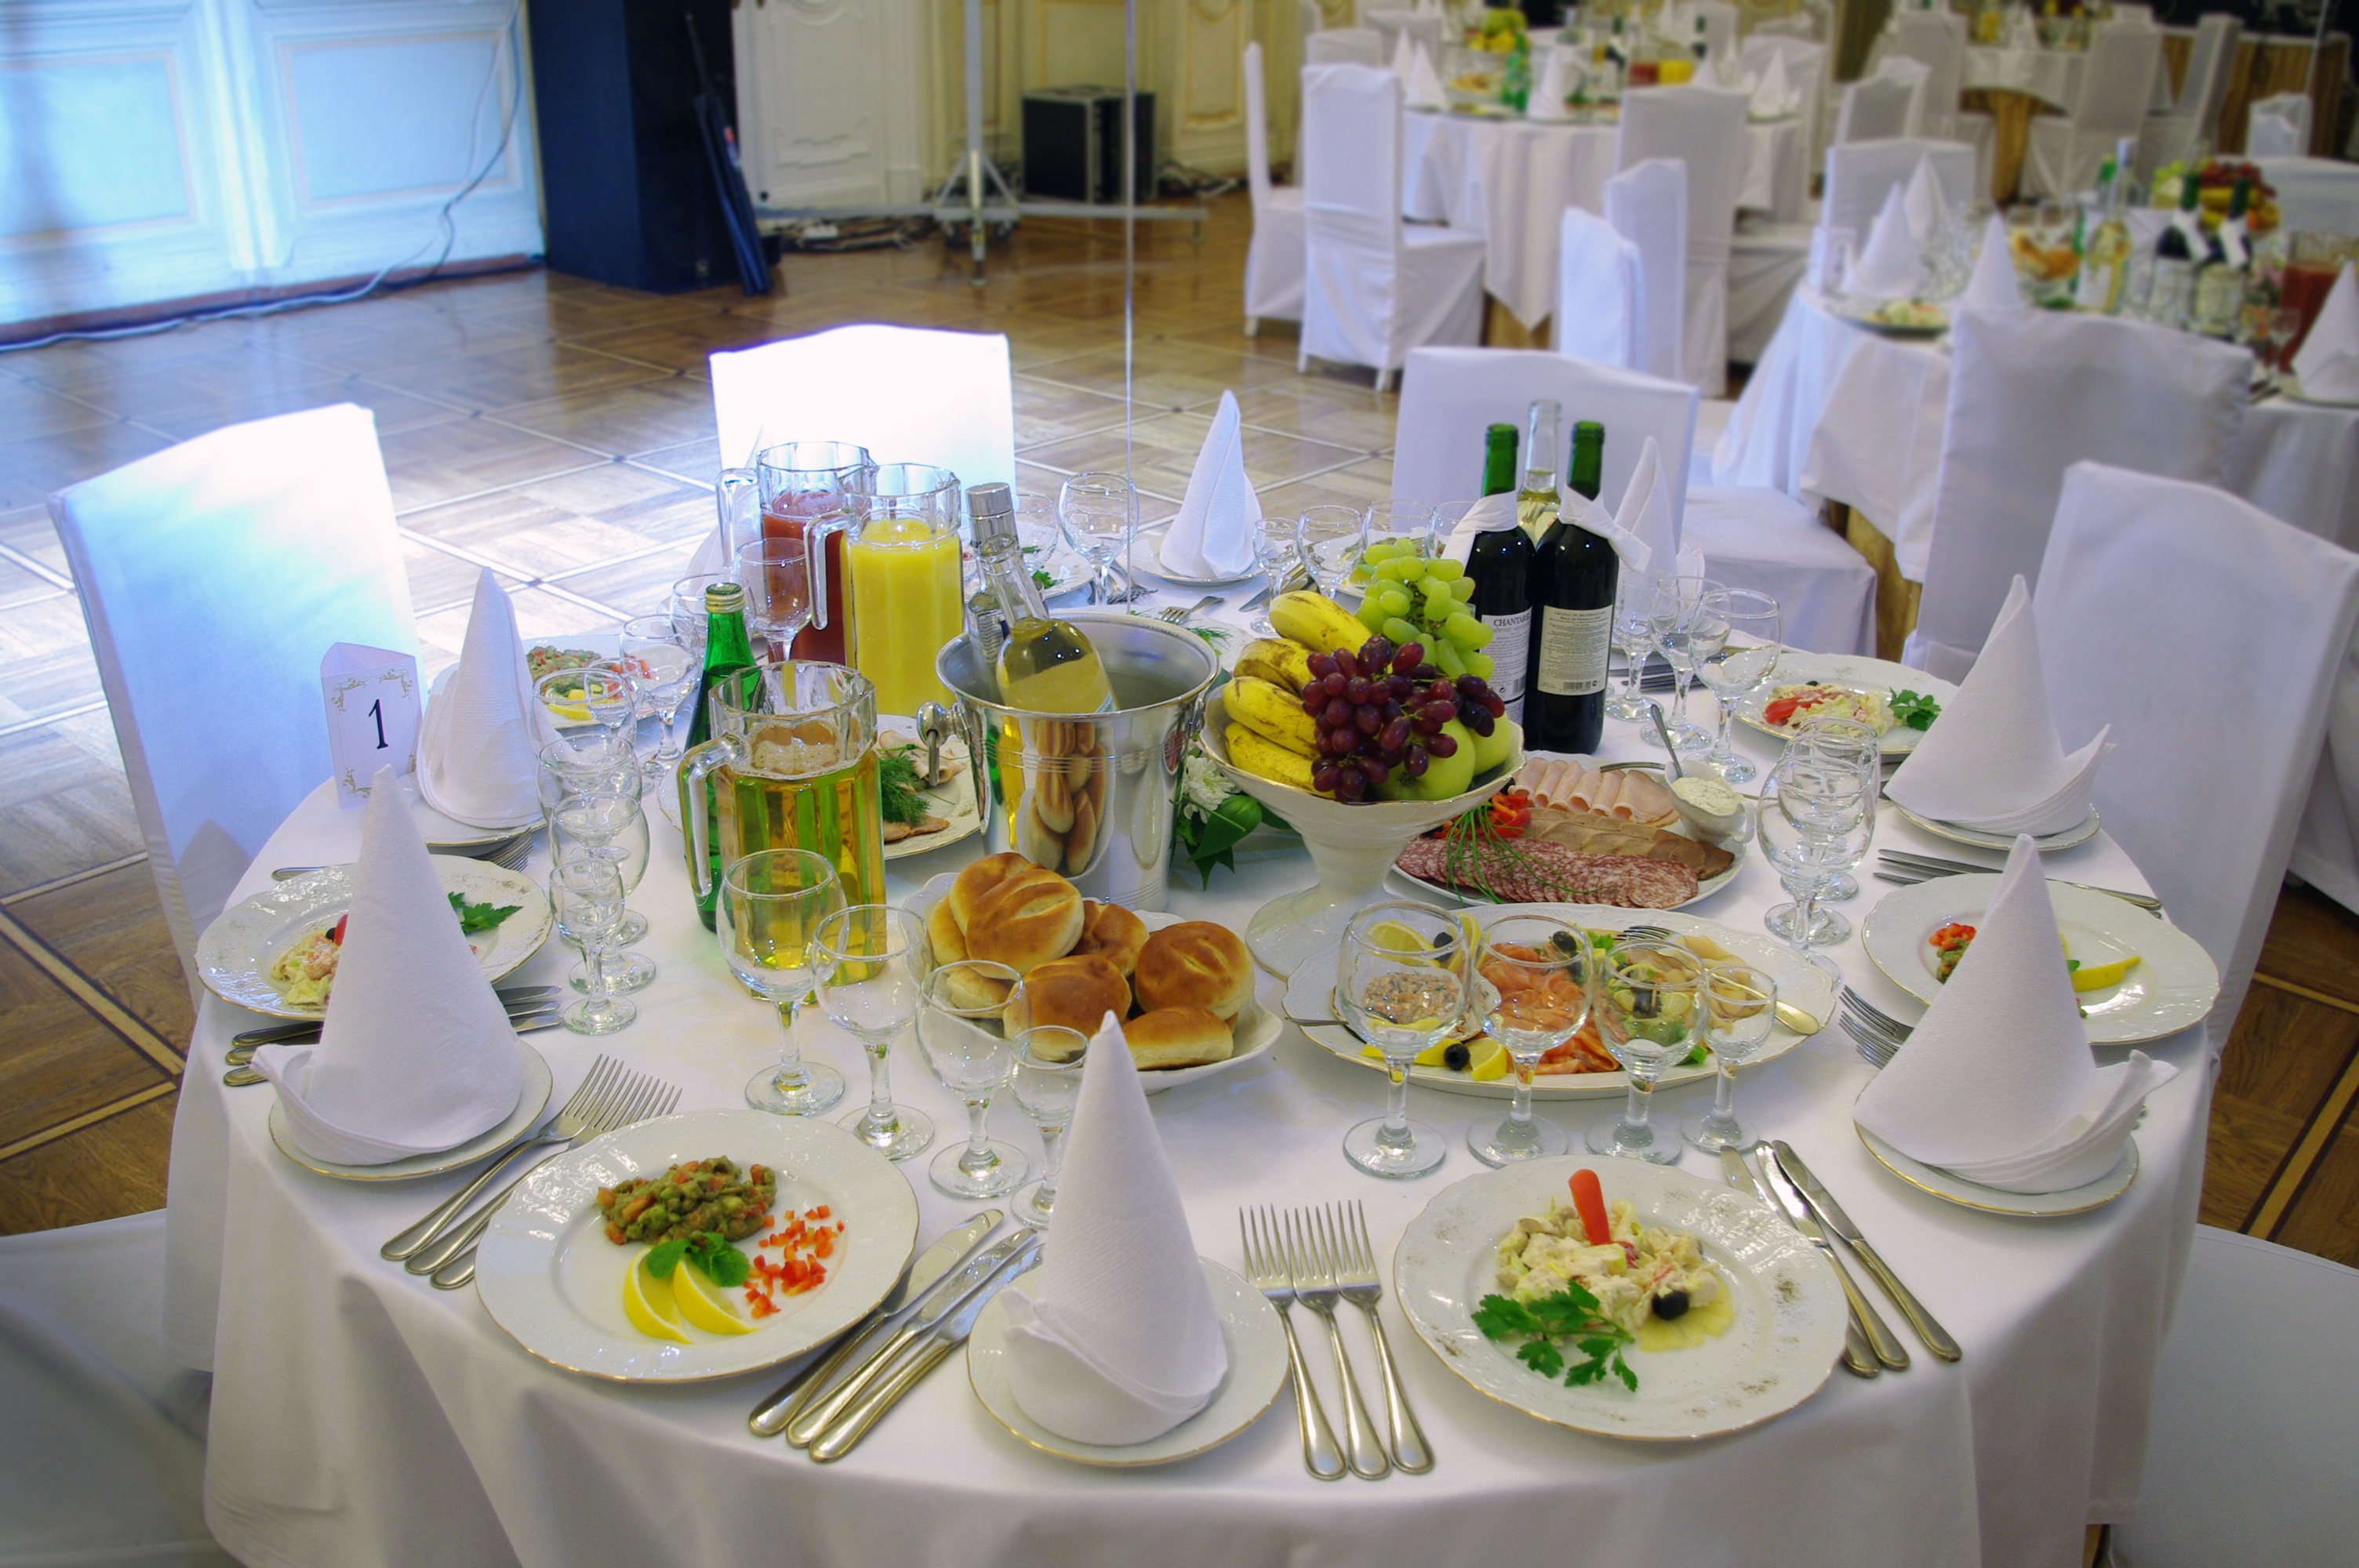 <Food in Restaurants and banquet halls of the Nicholas Palace in St. Petersburgn